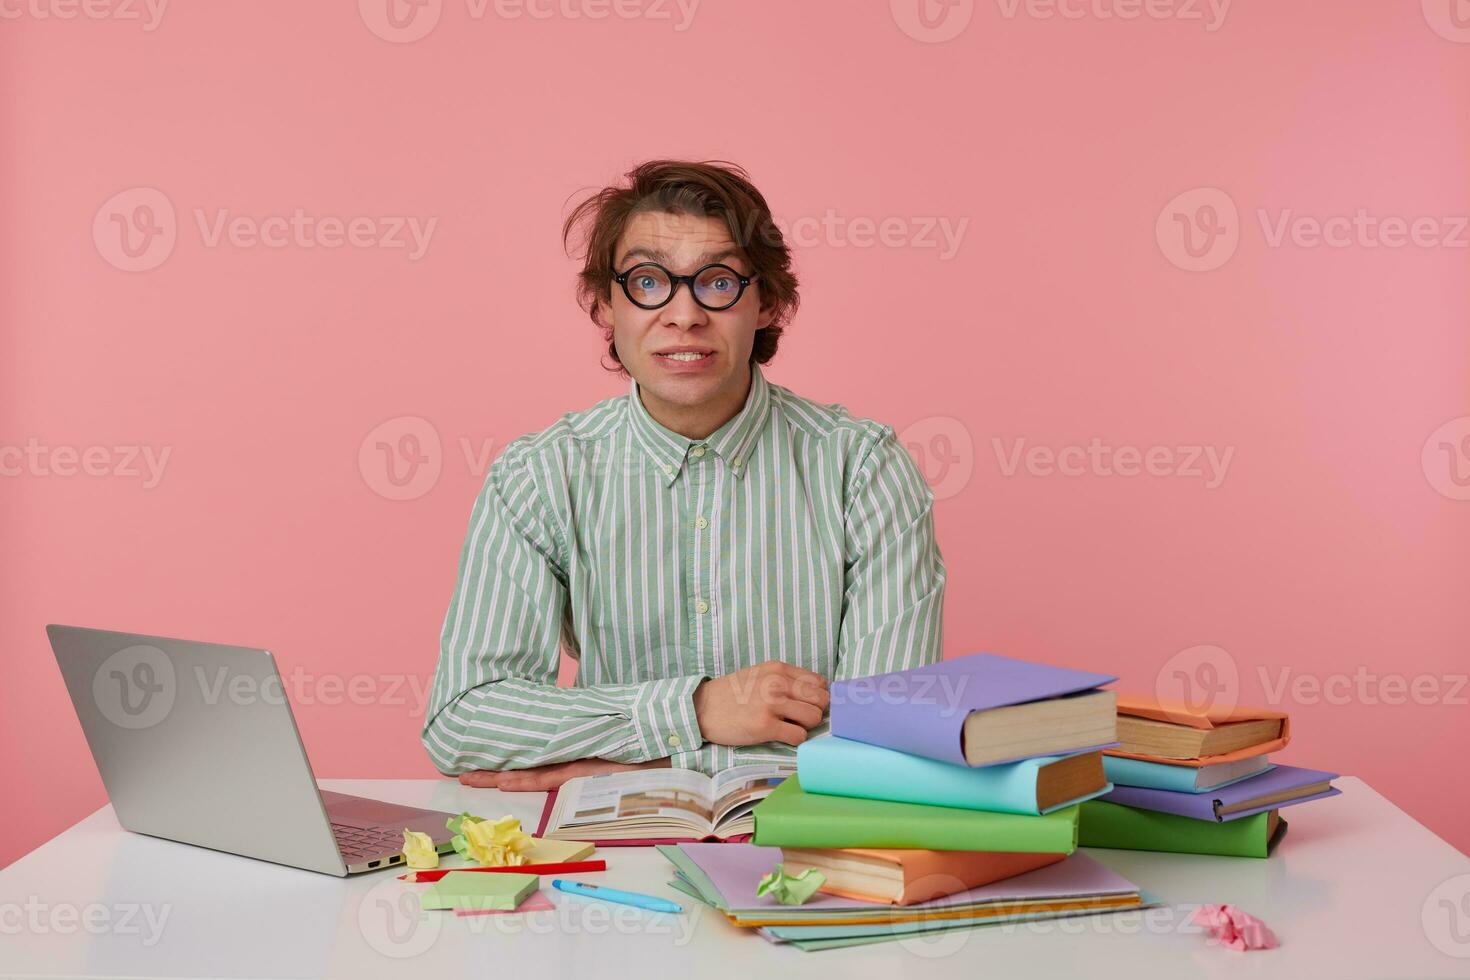 Portrait of young resentful guy with glasses, wears on blank shirt, sitting at a table with books, working at a laptop, looks confused. Isolated over pink background. photo